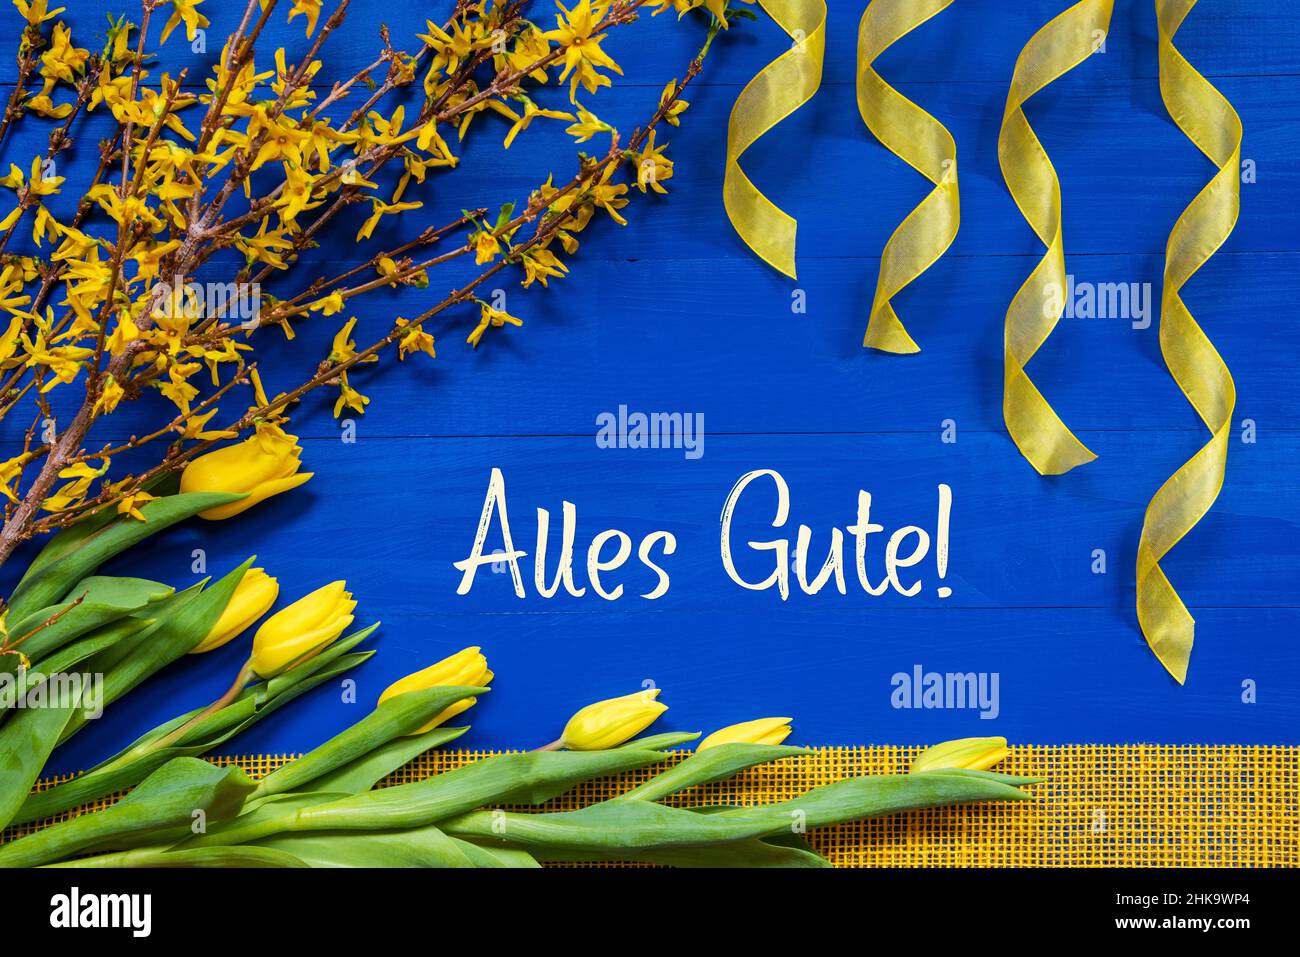 German Text Alles Gute Means Best Wishes. Yellow Spring Flowers Like Tulip And Branches. Festive Decoration With Ribbon. Blue Wooden Background Stock Photo